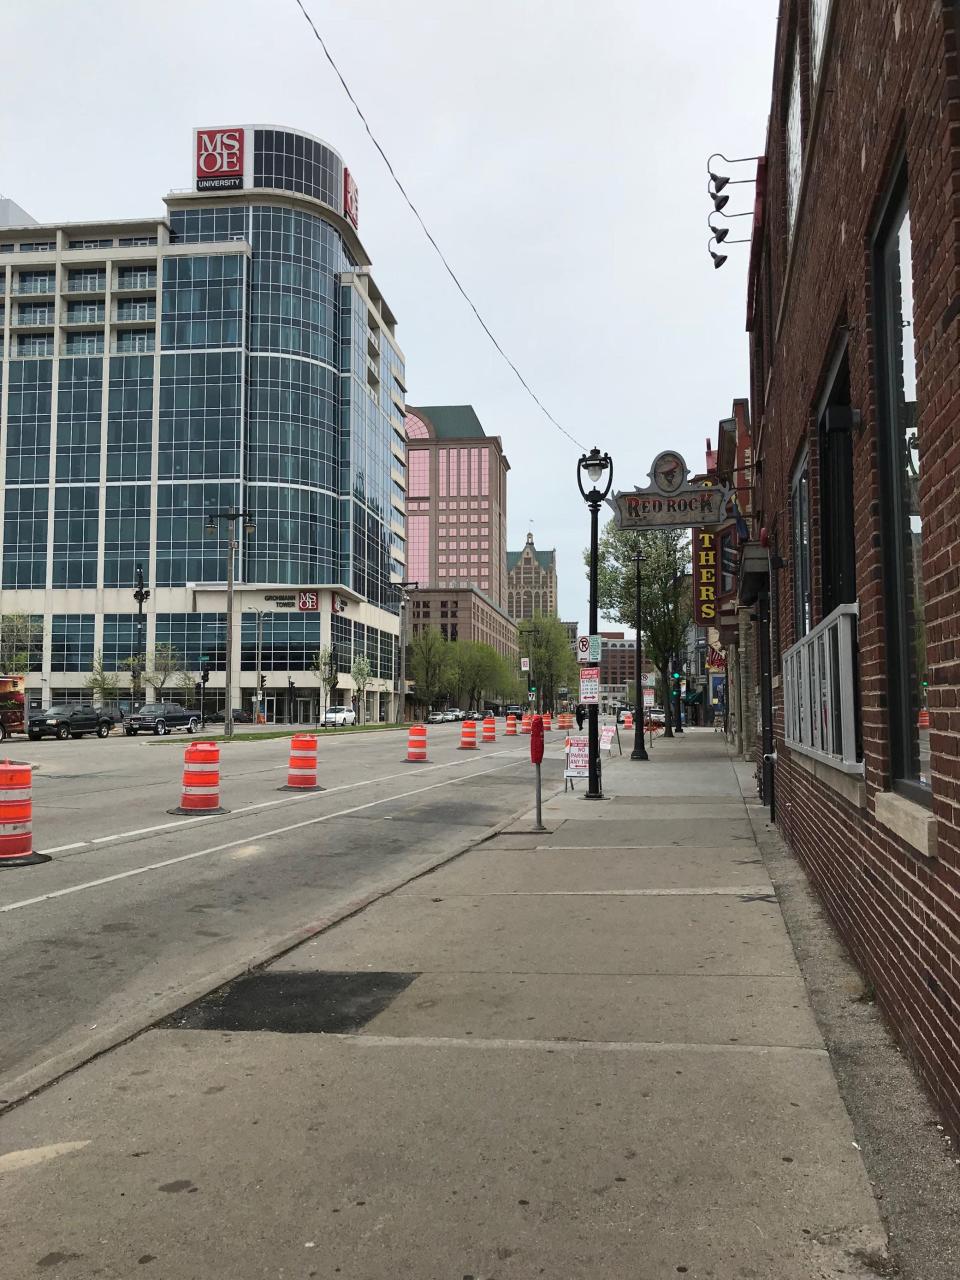 Bars and restaurants along North Water Street saw few people during the Milwaukee Bucks playoff game Sunday afternoon. The street was the site of two shootings Friday night after the previous game, including one that injured 17 people.